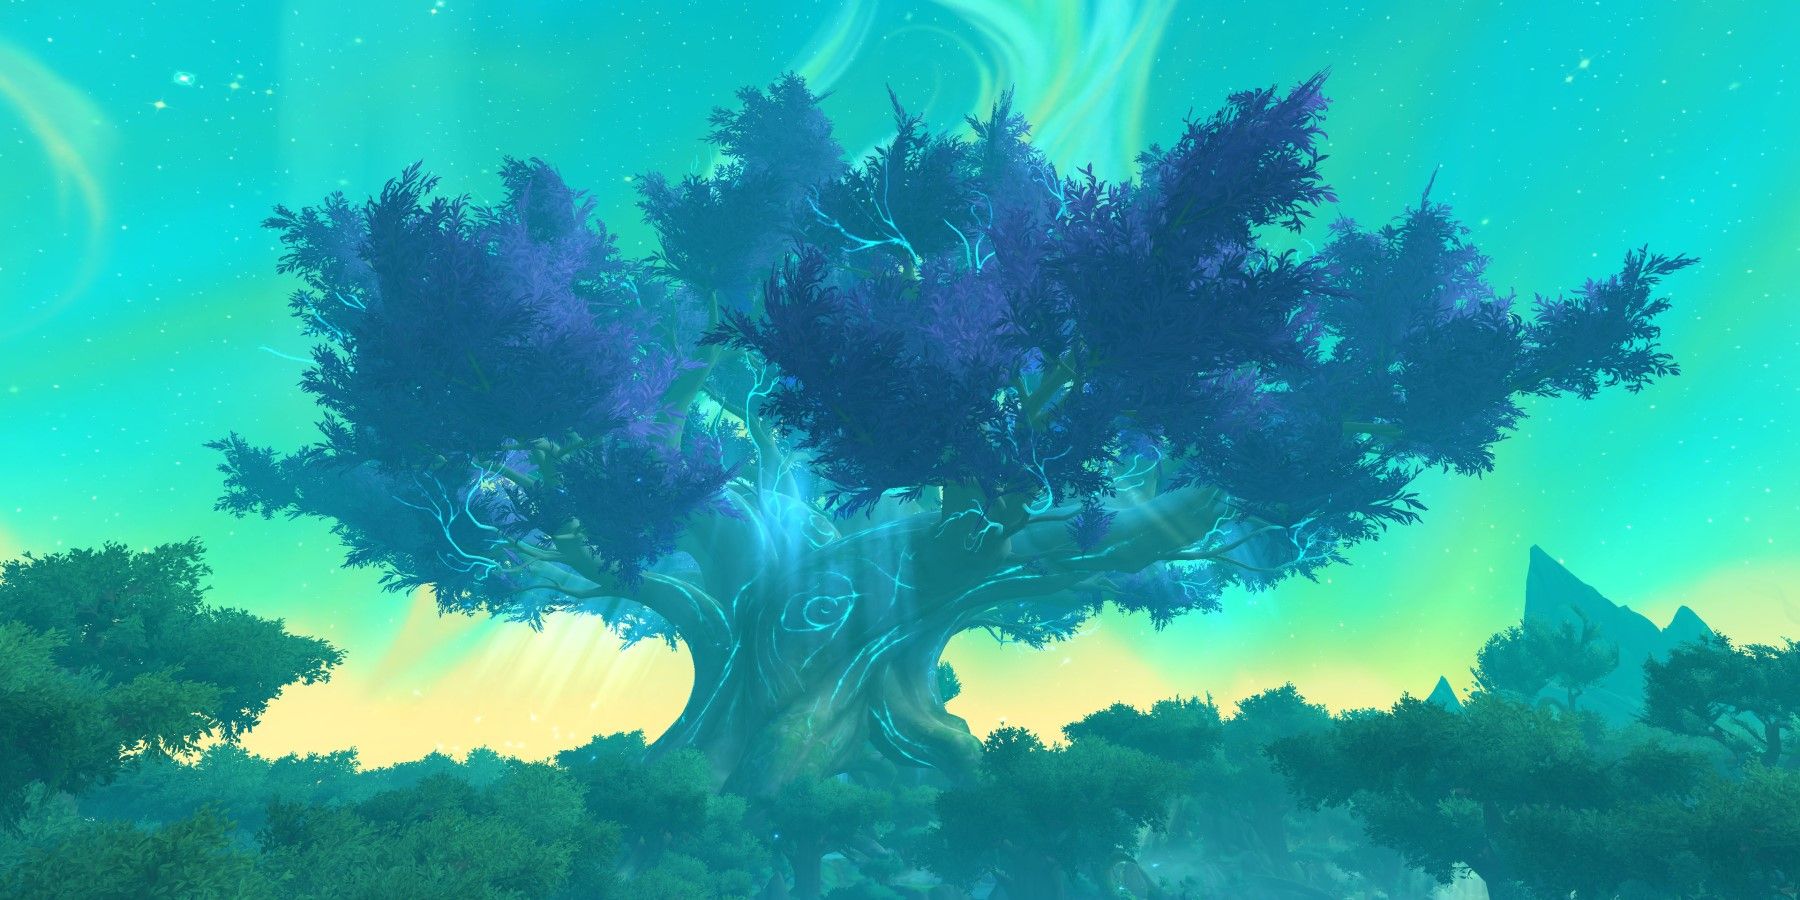 world-of-warcraft-dragonflight-patch-10-2-5-seeds-of-renewal-release-date-revealed-january-16-jan-2024